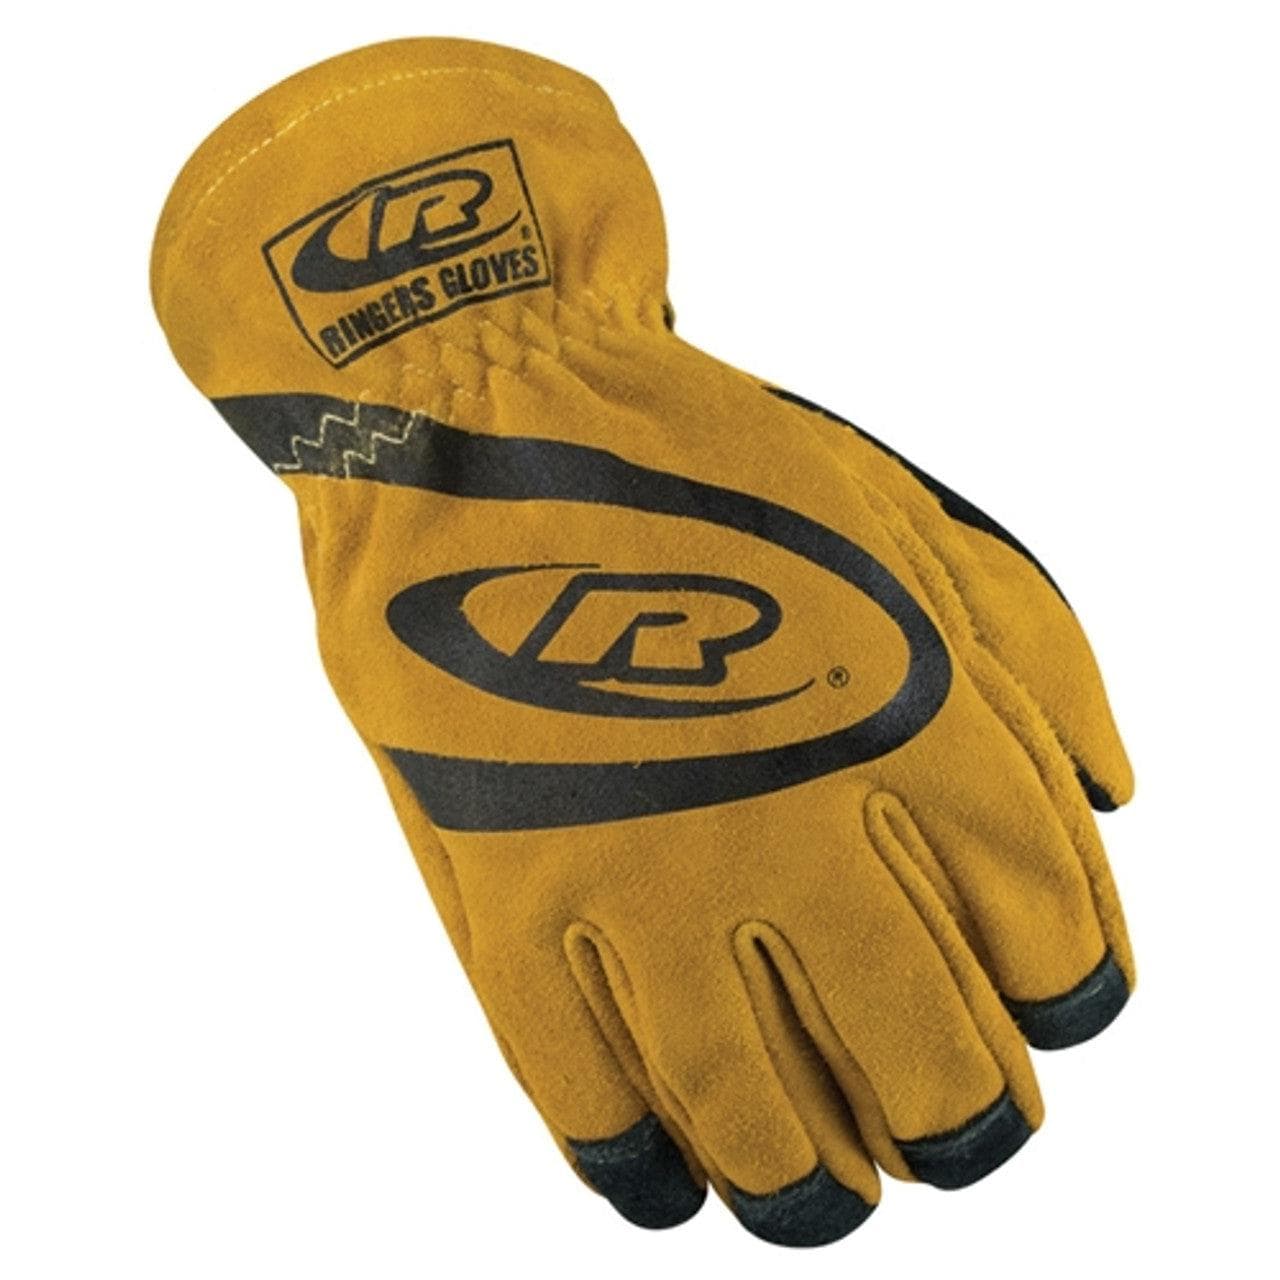 Ringers R-630 Structural Firefighter Gloves